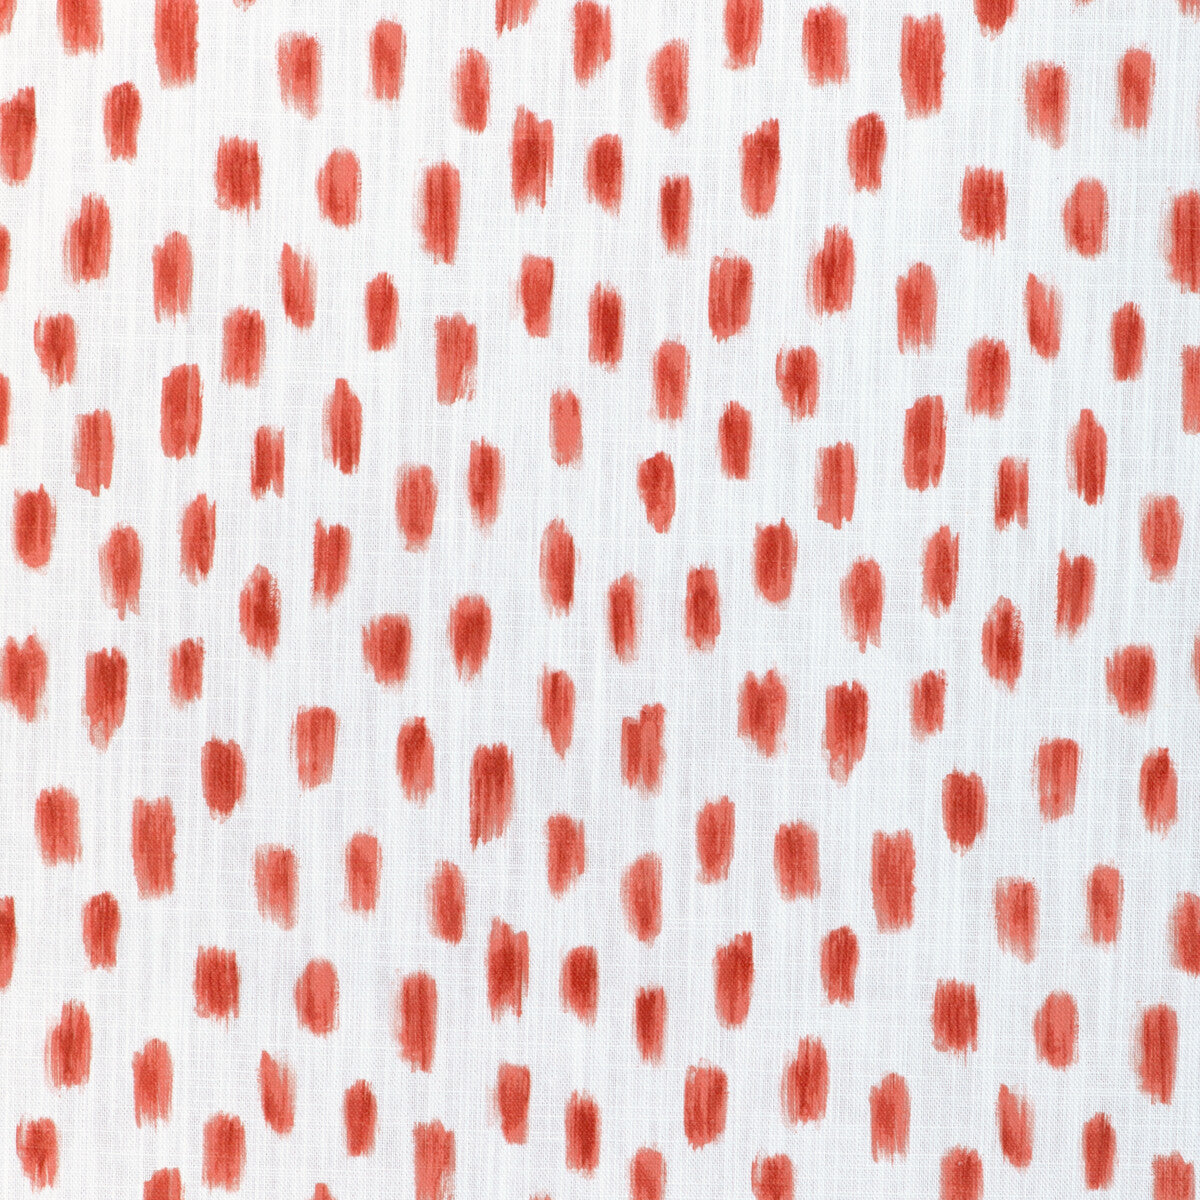 Brush Off fabric in scarlet color - pattern BRUSH OFF.19.0 - by Kravet Basics in the Small Scale Prints collection